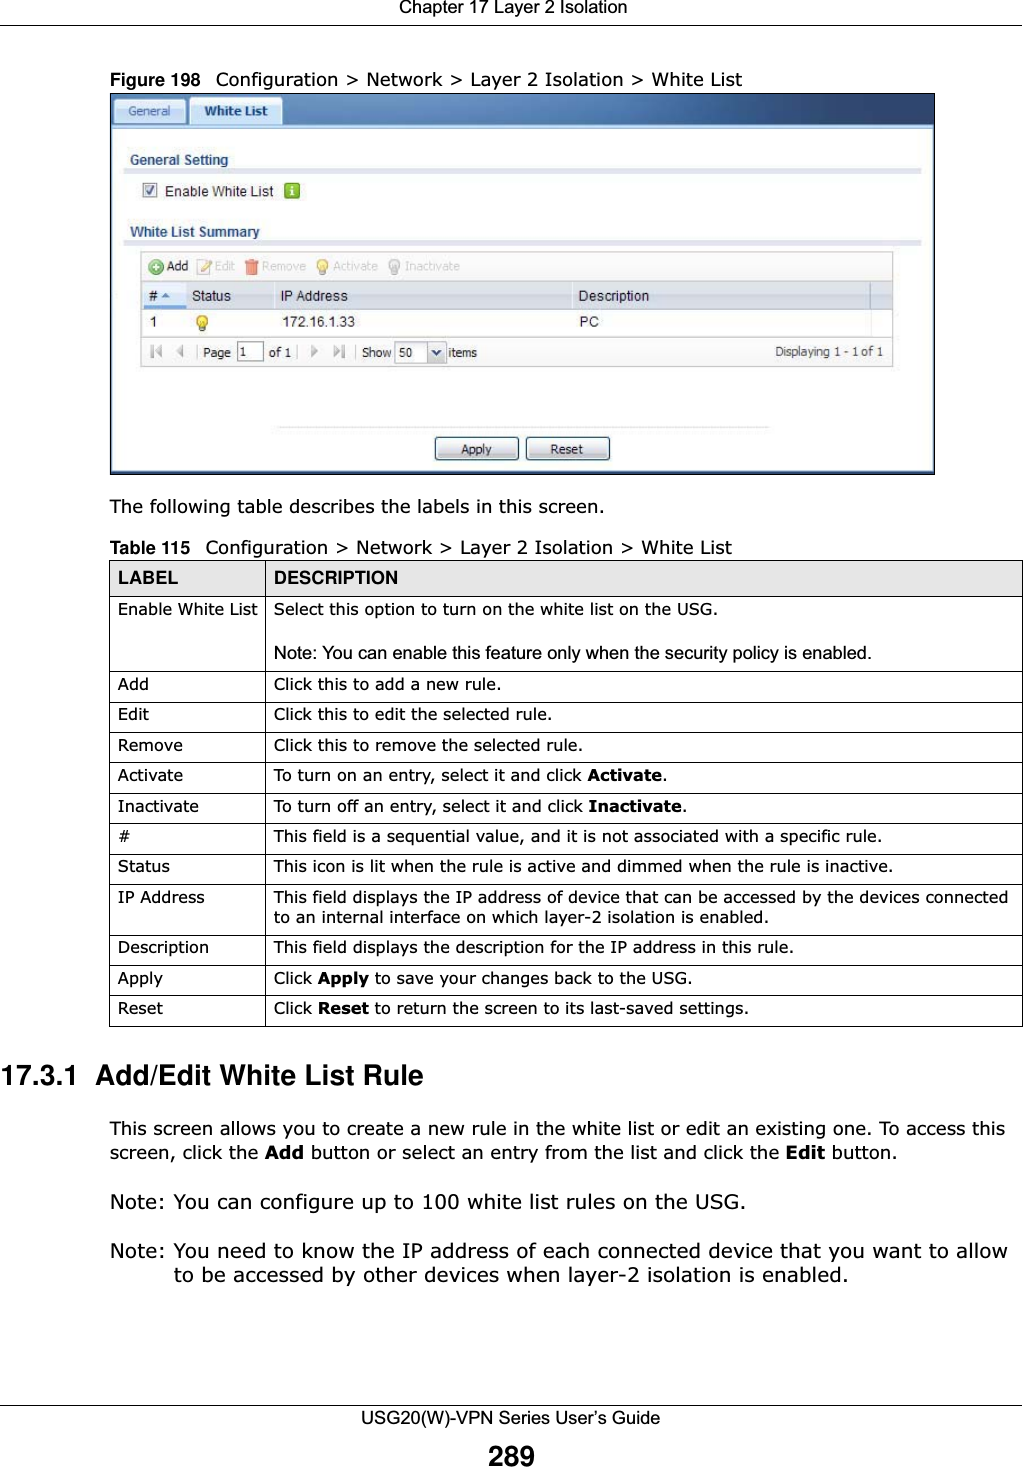  Chapter 17 Layer 2 IsolationUSG20(W)-VPN Series User’s Guide289Figure 198   Configuration &gt; Network &gt; Layer 2 Isolation &gt; White List The following table describes the labels in this screen.  17.3.1  Add/Edit White List Rule This screen allows you to create a new rule in the white list or edit an existing one. To access this screen, click the Add button or select an entry from the list and click the Edit button.Note: You can configure up to 100 white list rules on the USG.Note: You need to know the IP address of each connected device that you want to allow to be accessed by other devices when layer-2 isolation is enabled.Table 115   Configuration &gt; Network &gt; Layer 2 Isolation &gt; White ListLABEL DESCRIPTIONEnable White List Select this option to turn on the white list on the USG. Note: You can enable this feature only when the security policy is enabled.Add Click this to add a new rule.Edit Click this to edit the selected rule.Remove Click this to remove the selected rule.Activate To turn on an entry, select it and click Activate.Inactivate To turn off an entry, select it and click Inactivate.# This field is a sequential value, and it is not associated with a specific rule.Status This icon is lit when the rule is active and dimmed when the rule is inactive.IP Address This field displays the IP address of device that can be accessed by the devices connected to an internal interface on which layer-2 isolation is enabled.Description This field displays the description for the IP address in this rule.Apply Click Apply to save your changes back to the USG.Reset Click Reset to return the screen to its last-saved settings. 